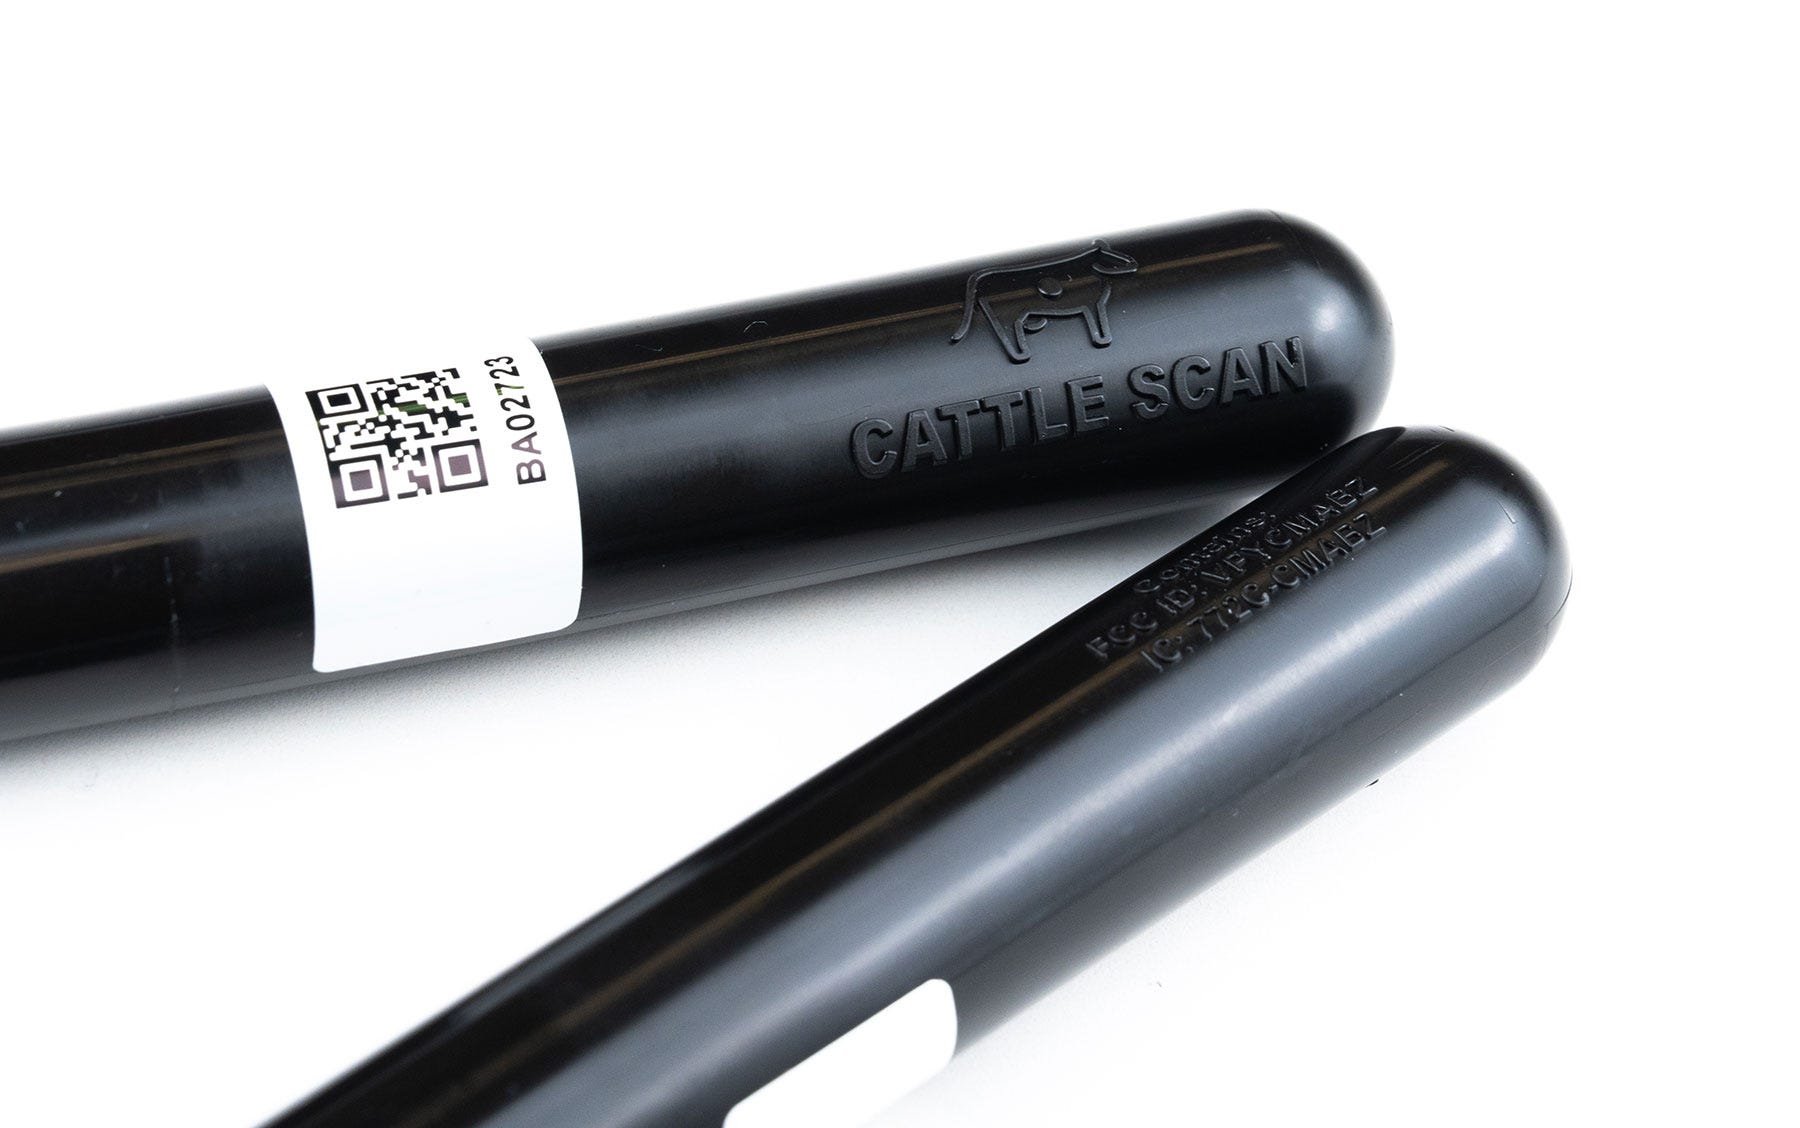 Courtesy of Cattle Scan - A product shot of two cylindrical devices with rounded ends set against a white background